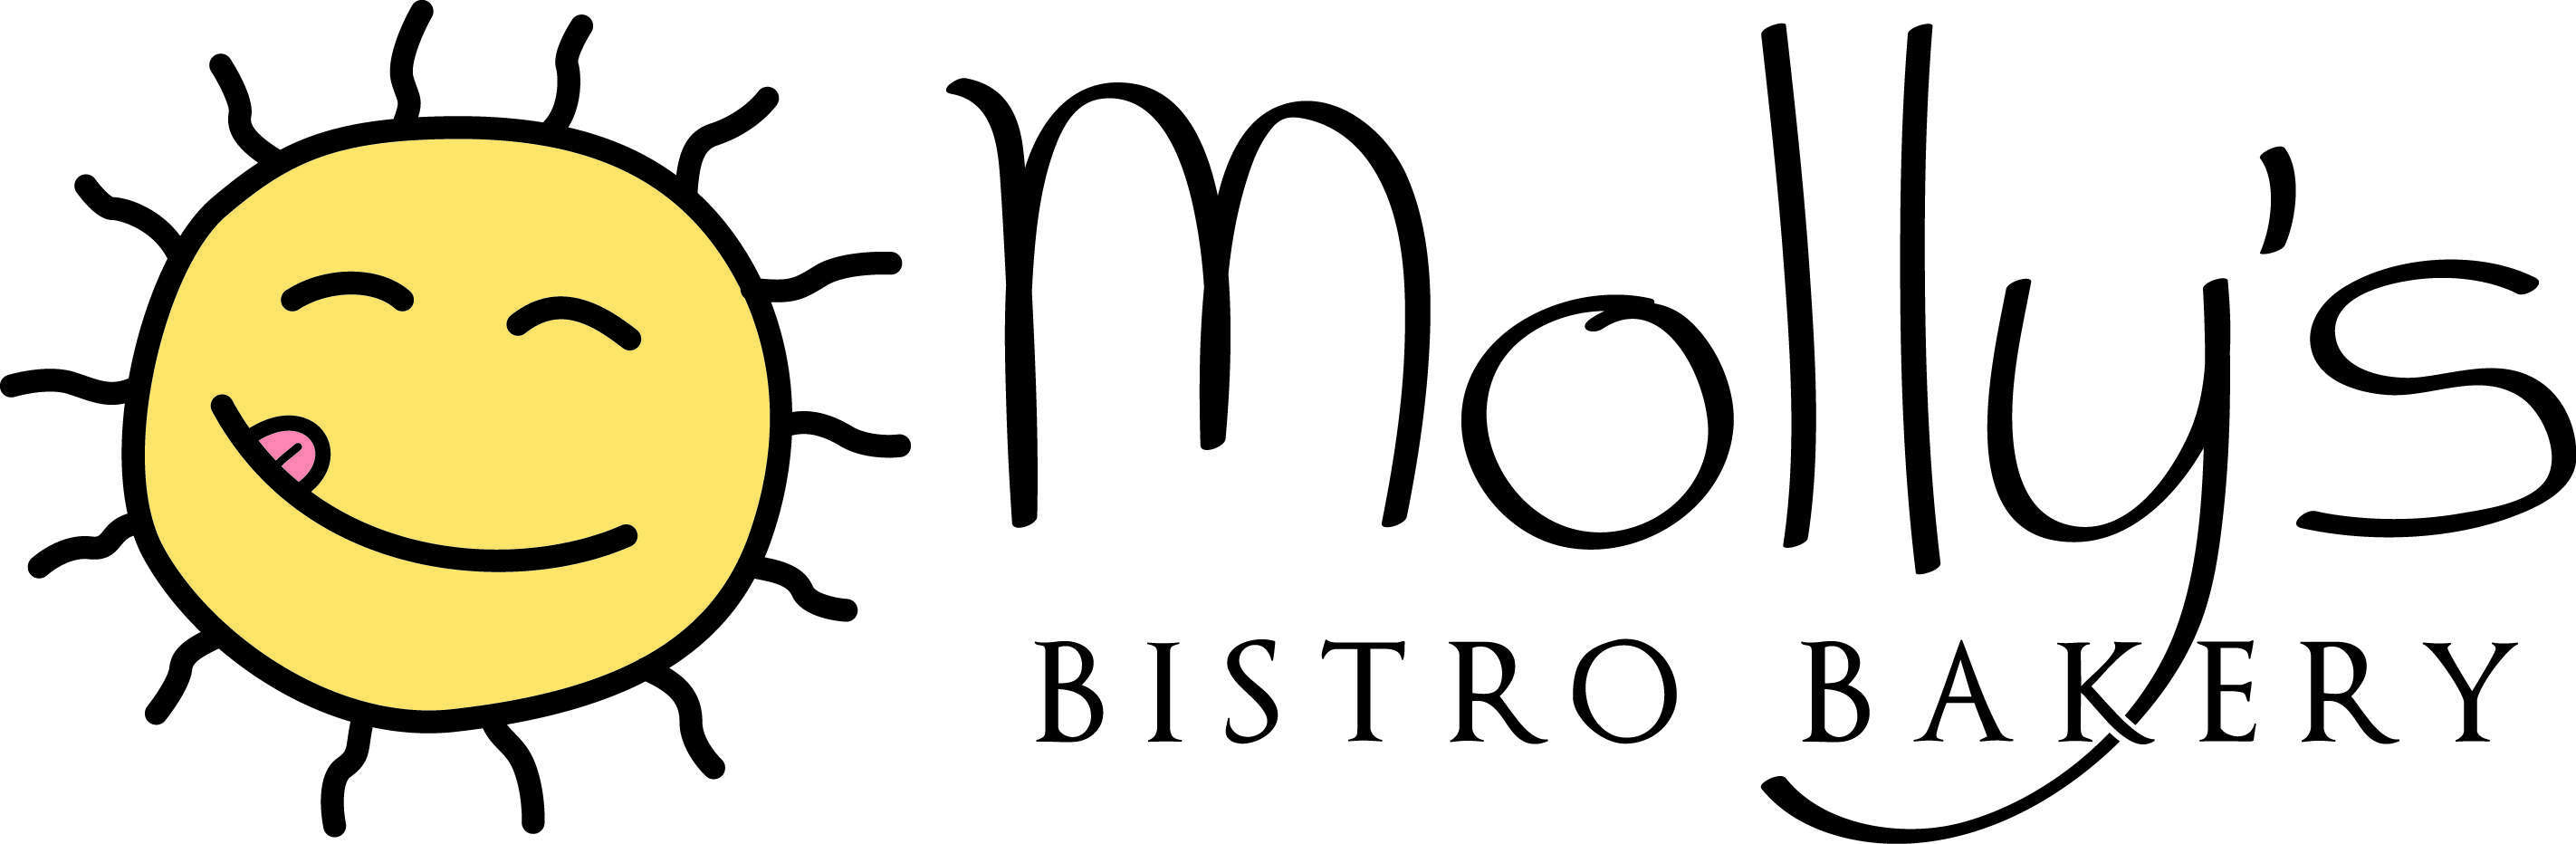 Molly's Bistro Bakery